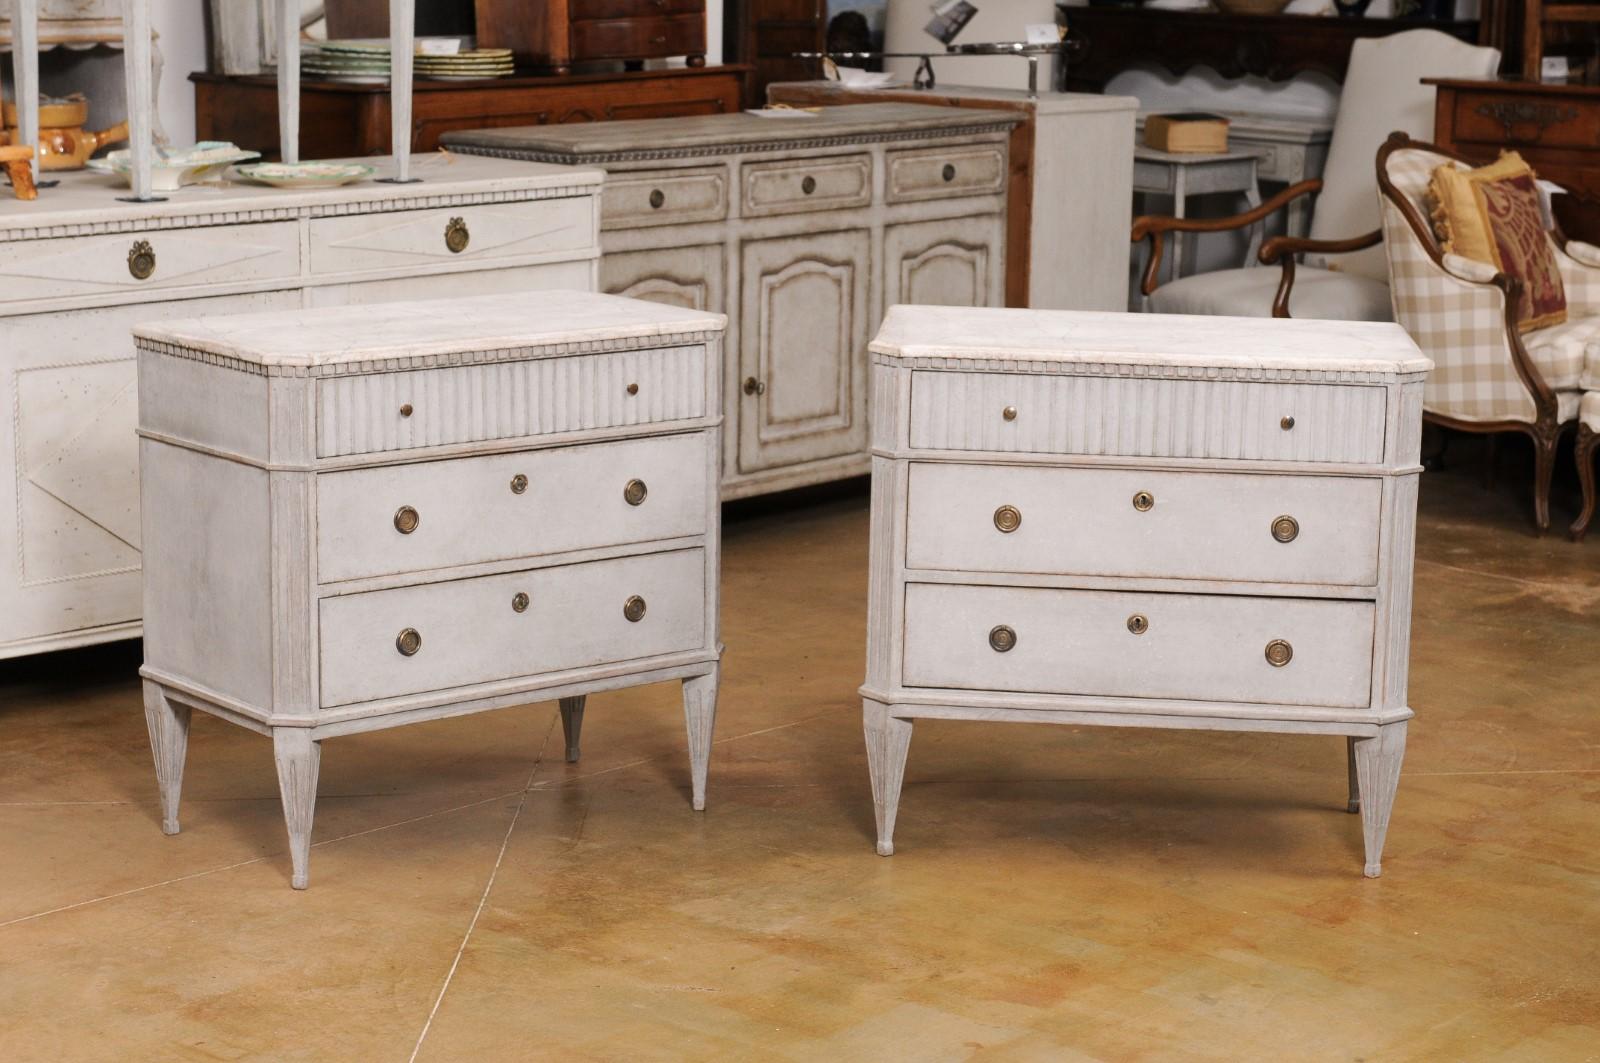 A pair of Swedish Gustavian style painted wood commodes from the 19th century, with marbleized tops and dentil moldings. Created in Sweden during the 19th century, each of this pair of Gustavian style commodes features a faux marble top with canted